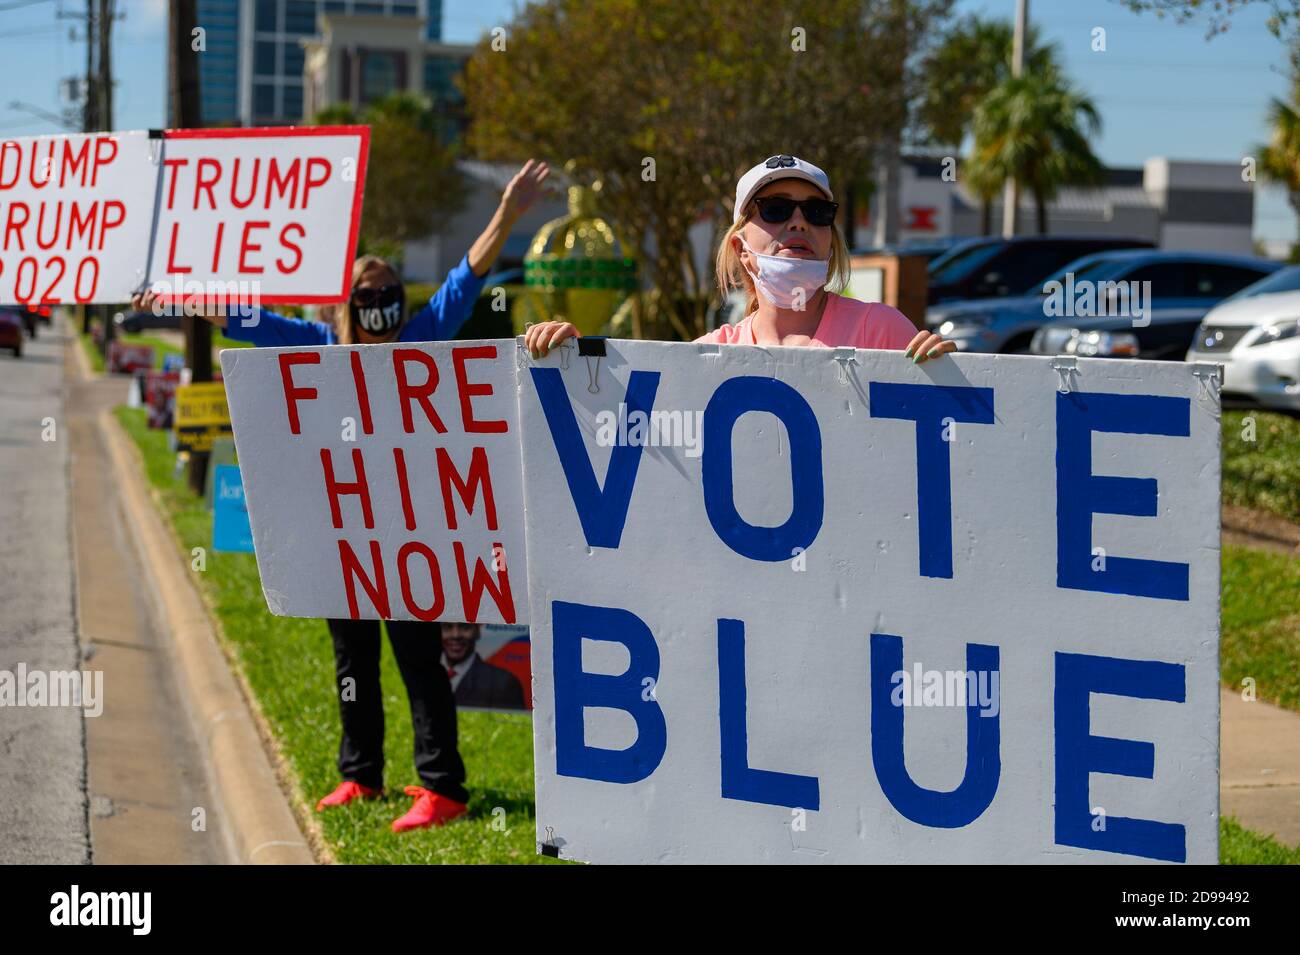 Houston, Texas, USA. 3rd Nov, 2020. Volunteers hold signs VOTE BLUE, DUMP TRUMP, TRUMP LIES outside a polling station in Harris County, Houston, Texas, USA. Credit: Michelmond/Alamy Live News. Stock Photo